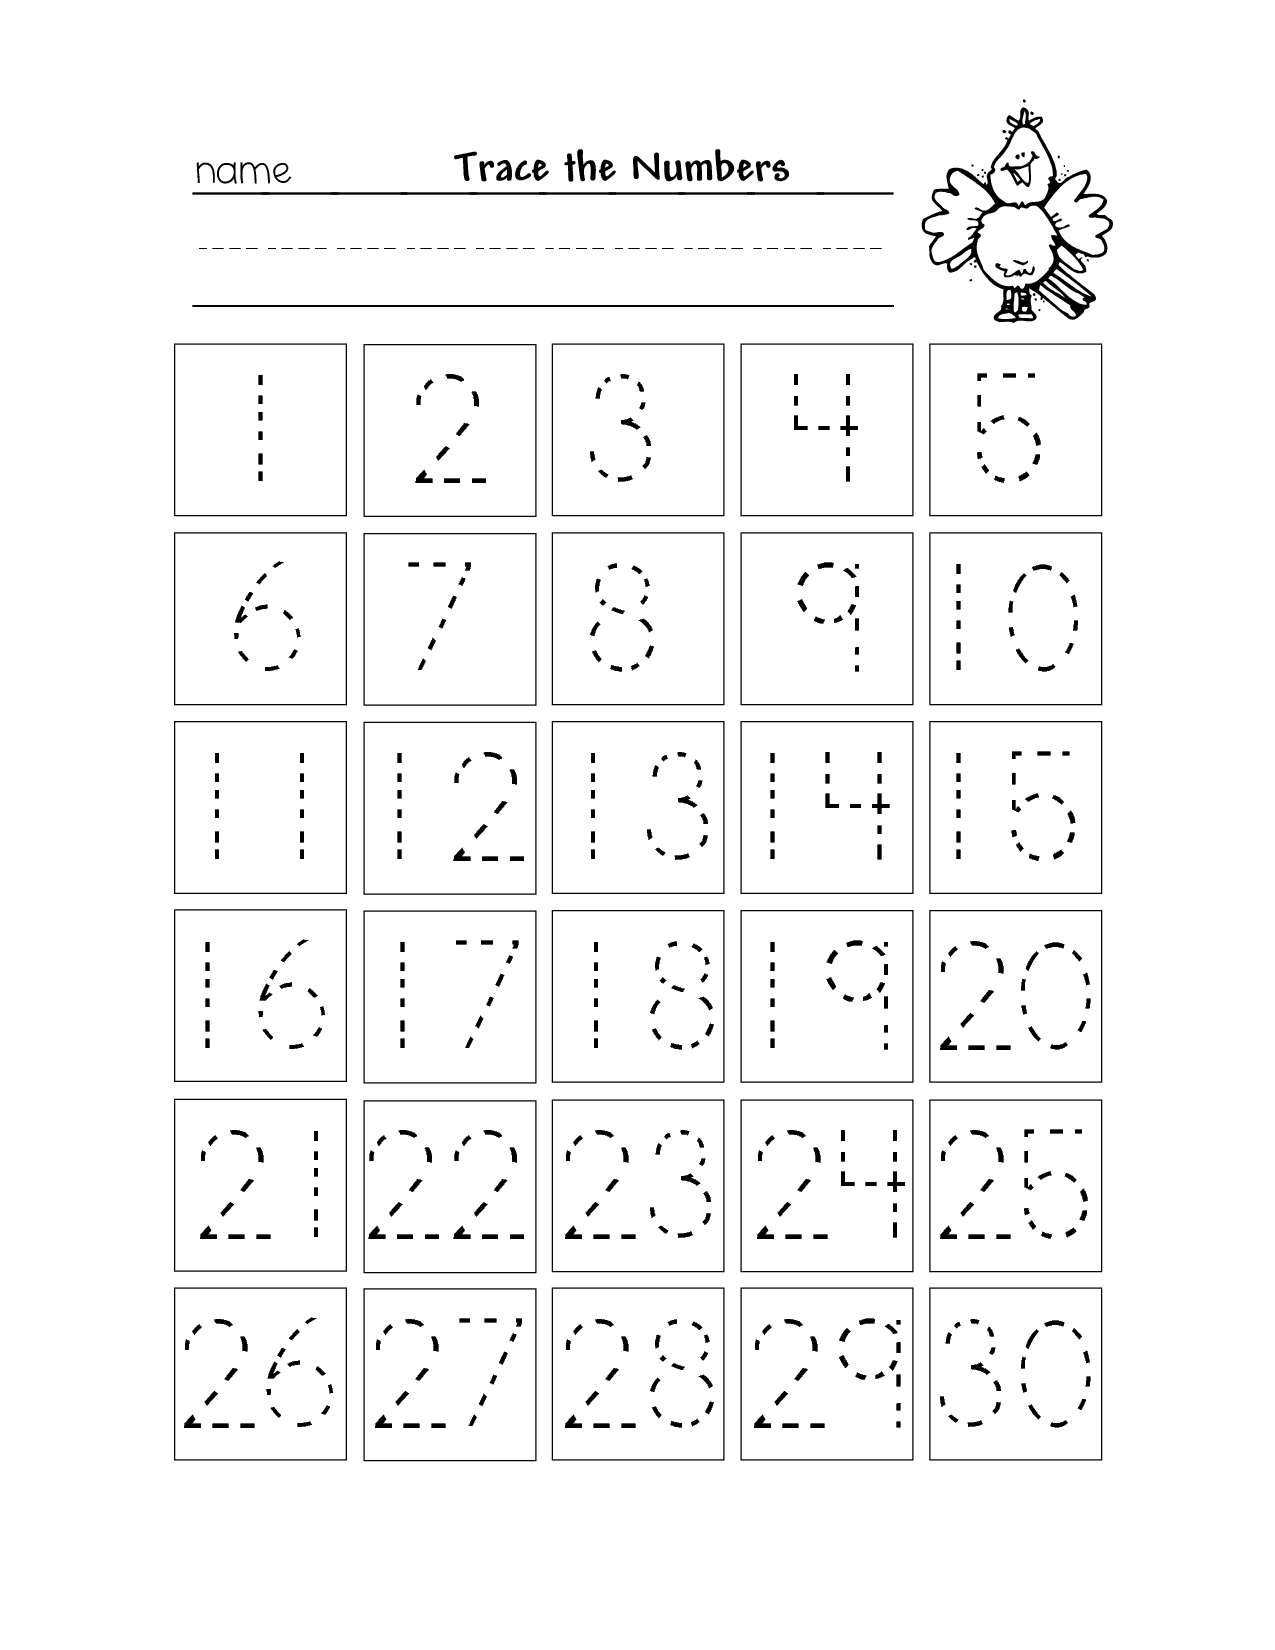 13 Best Images Of Numbers 1 25 Worksheets Tracing Numbers 1 30